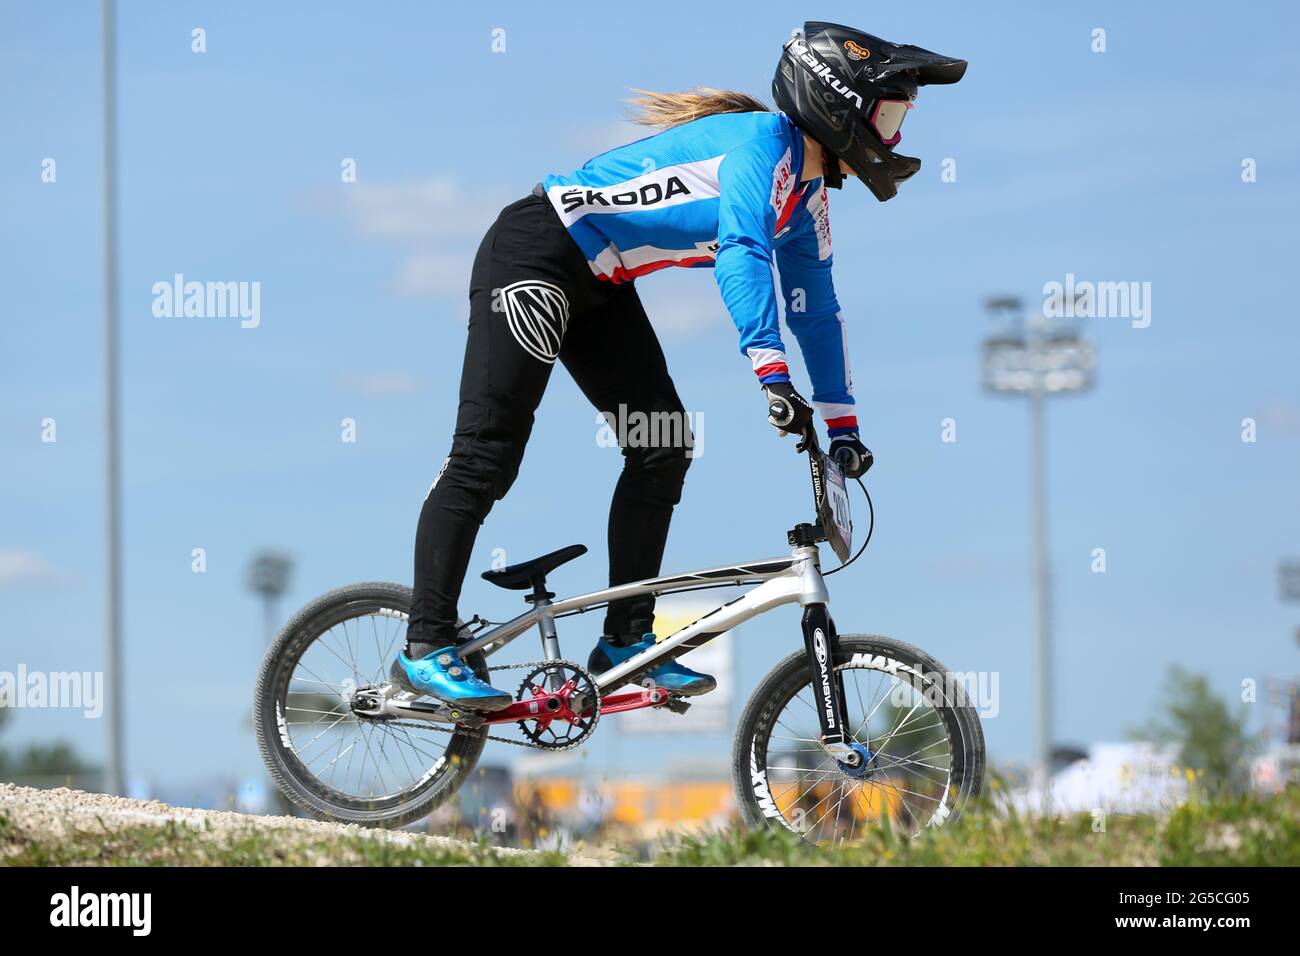 Eliska BARTUNKOVA of Czech Republic competes in the UCI BMX Supercross  World Cup Round 1 at the BMX Olympic Arena on May 8th 2021 in Verona, Italy  Stock Photo - Alamy